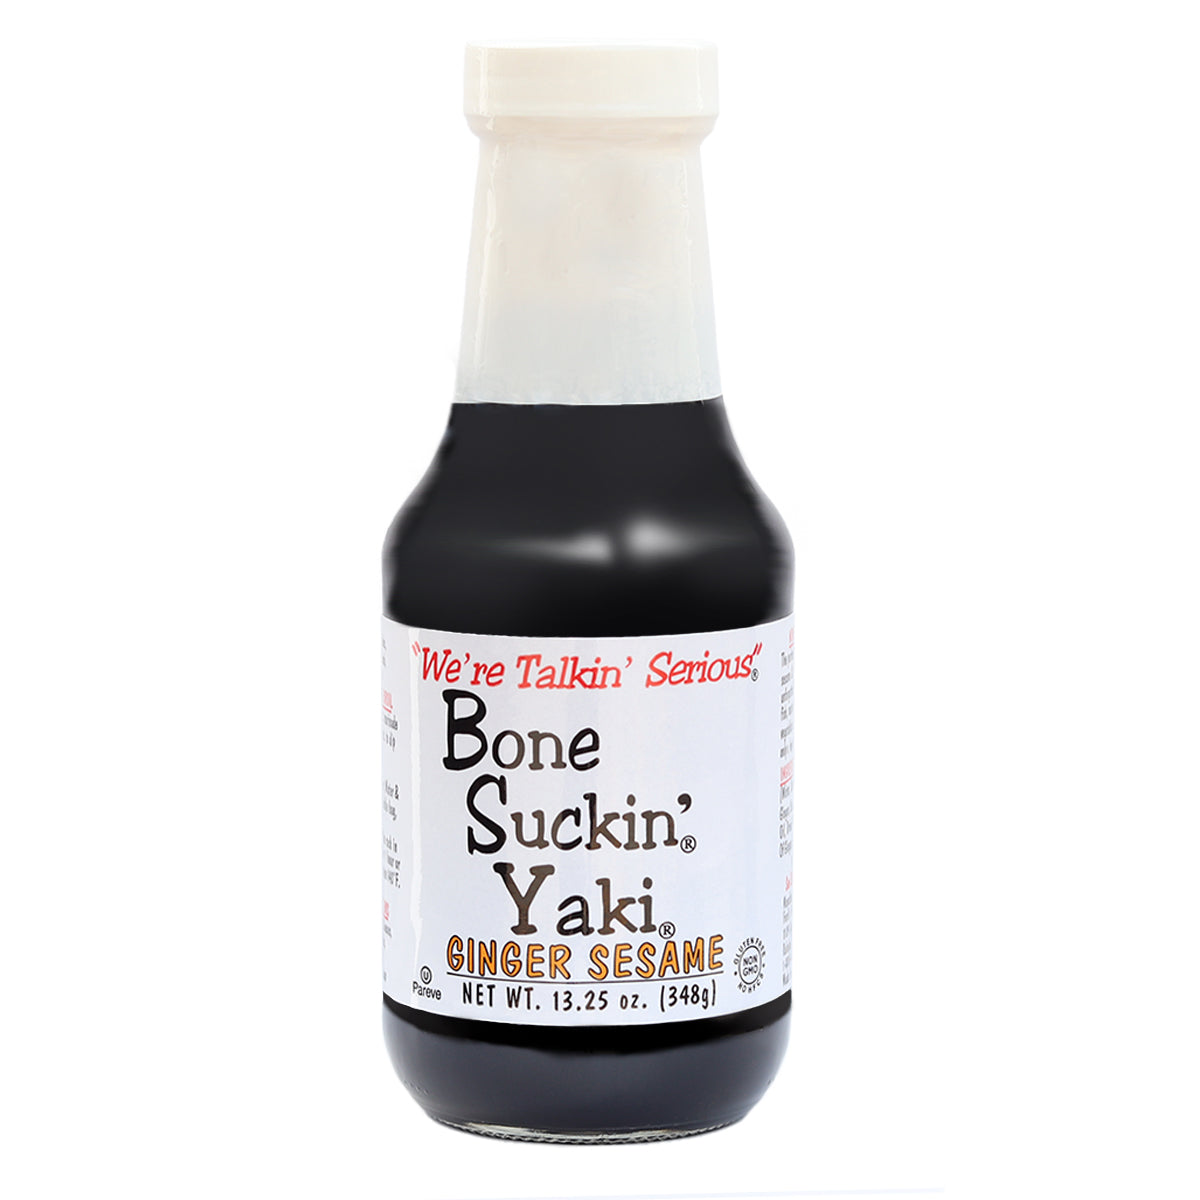 Bone Suckin' Yaki, Ginger Sesame, 13.25 oz. bottle. Bone Suckin'® Yaki®, Ginger Sesame  The perfect blend of Zesty ginger, the nutty taste of sesame & the smooth finish of tamari, adds an unforgettable flavor to any dish. A favorite for basting fish, marinating meat before grilling, sautéing vegetables or using as a finishing sauce.